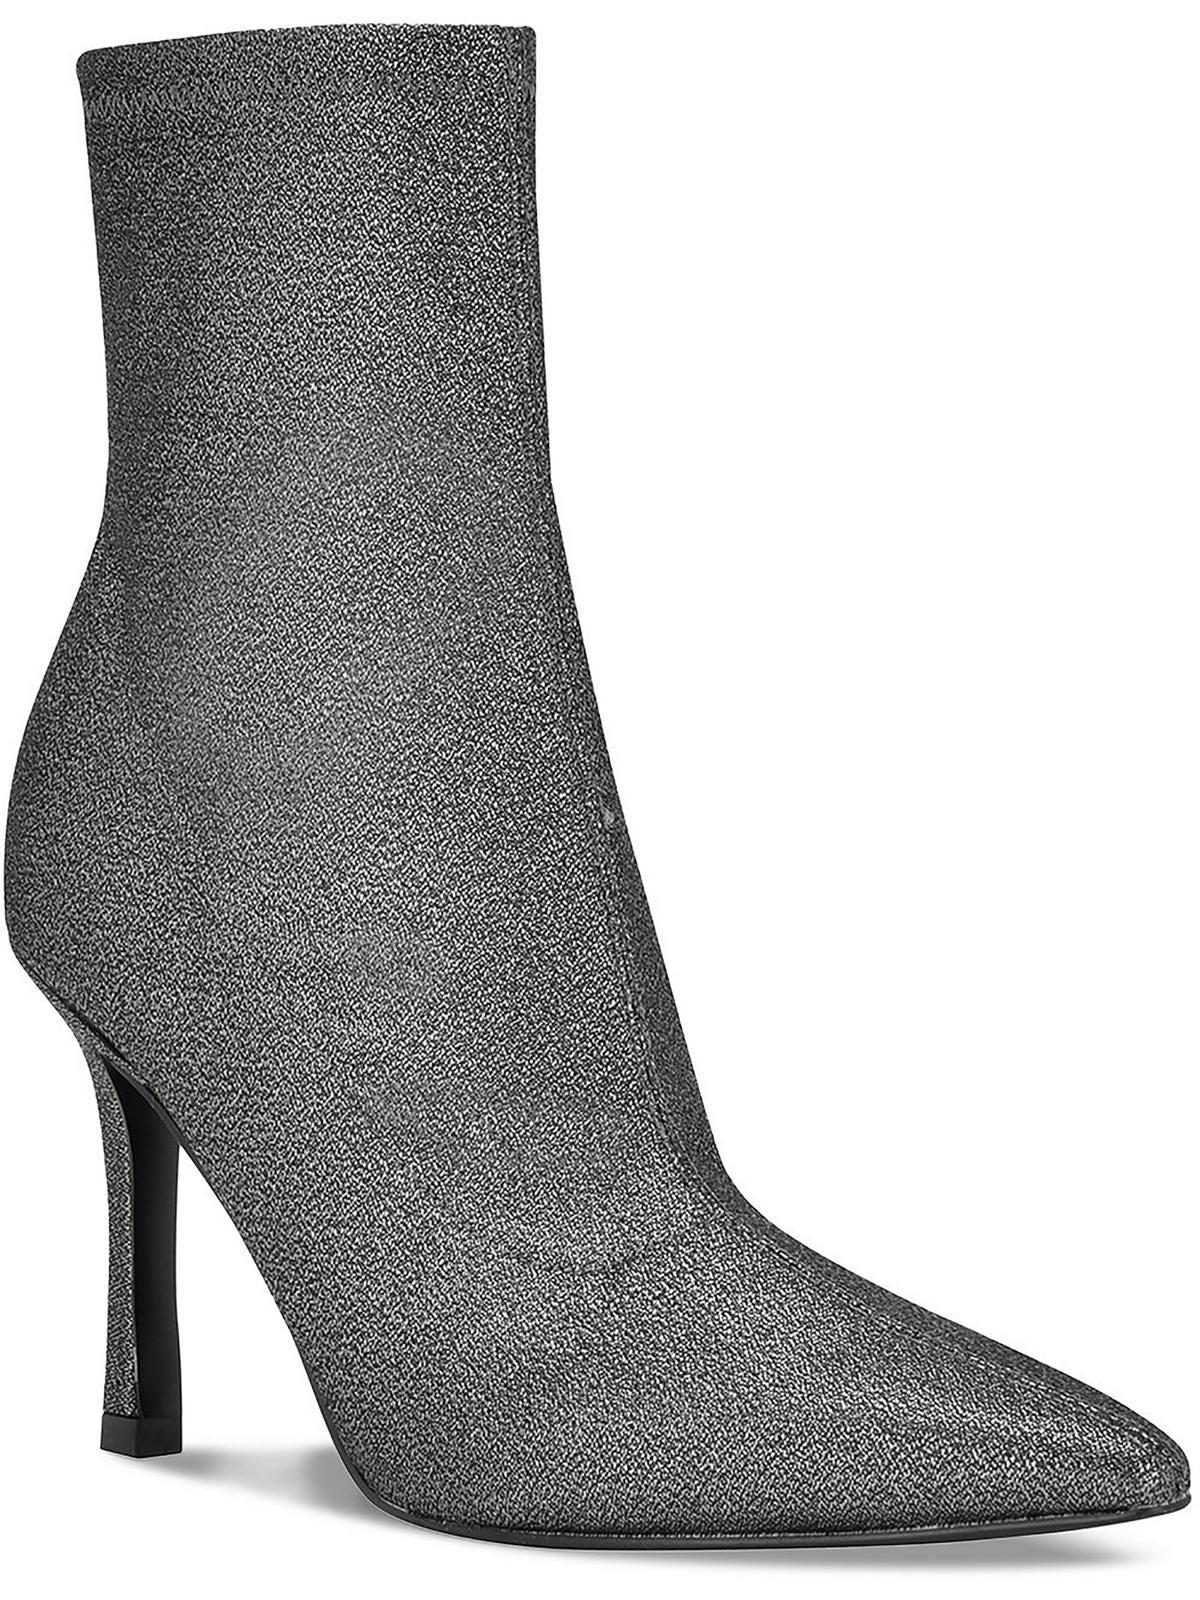 Marc Fisher Kellen Glitter Pointed Toe Ankle Boots in Gray | Lyst